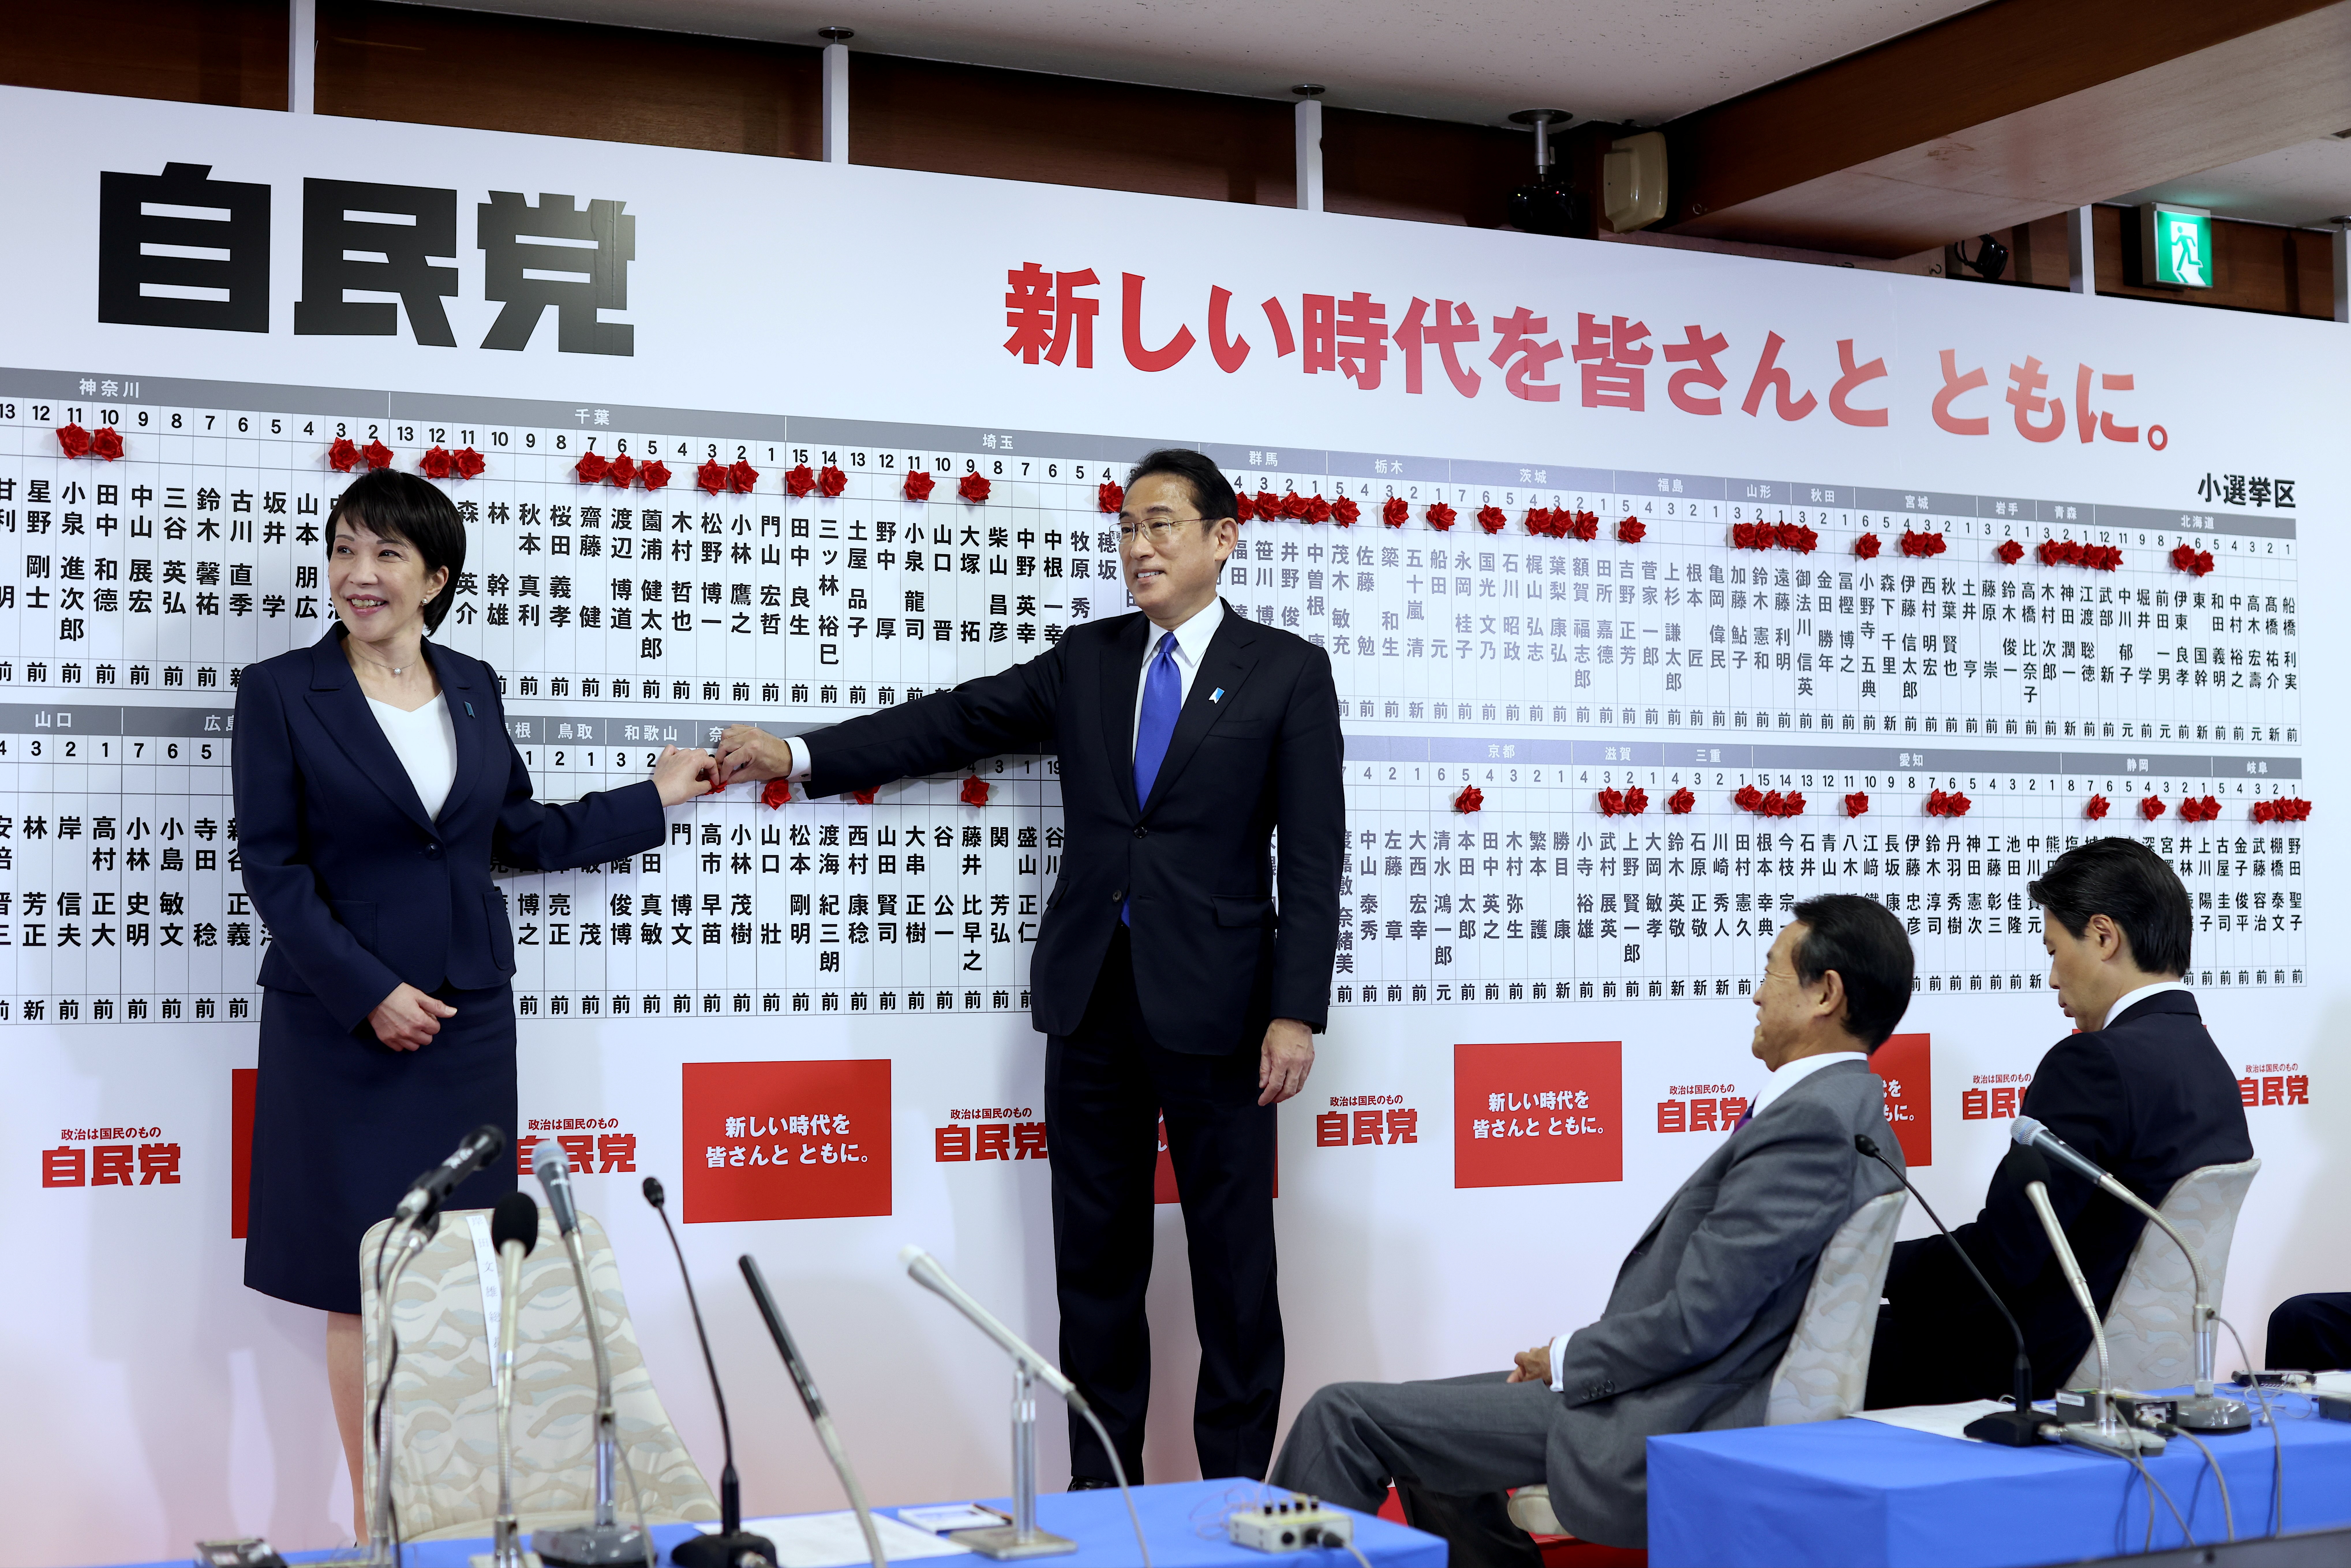 Japan's Prime Minister and ruling Liberal Democratic Party leader Fumio Kishida and former minister of the hall internal affairs and a senior member of the party, Sanae Takaichi put a rosette on her name after winning a seat at the lower house parliament,